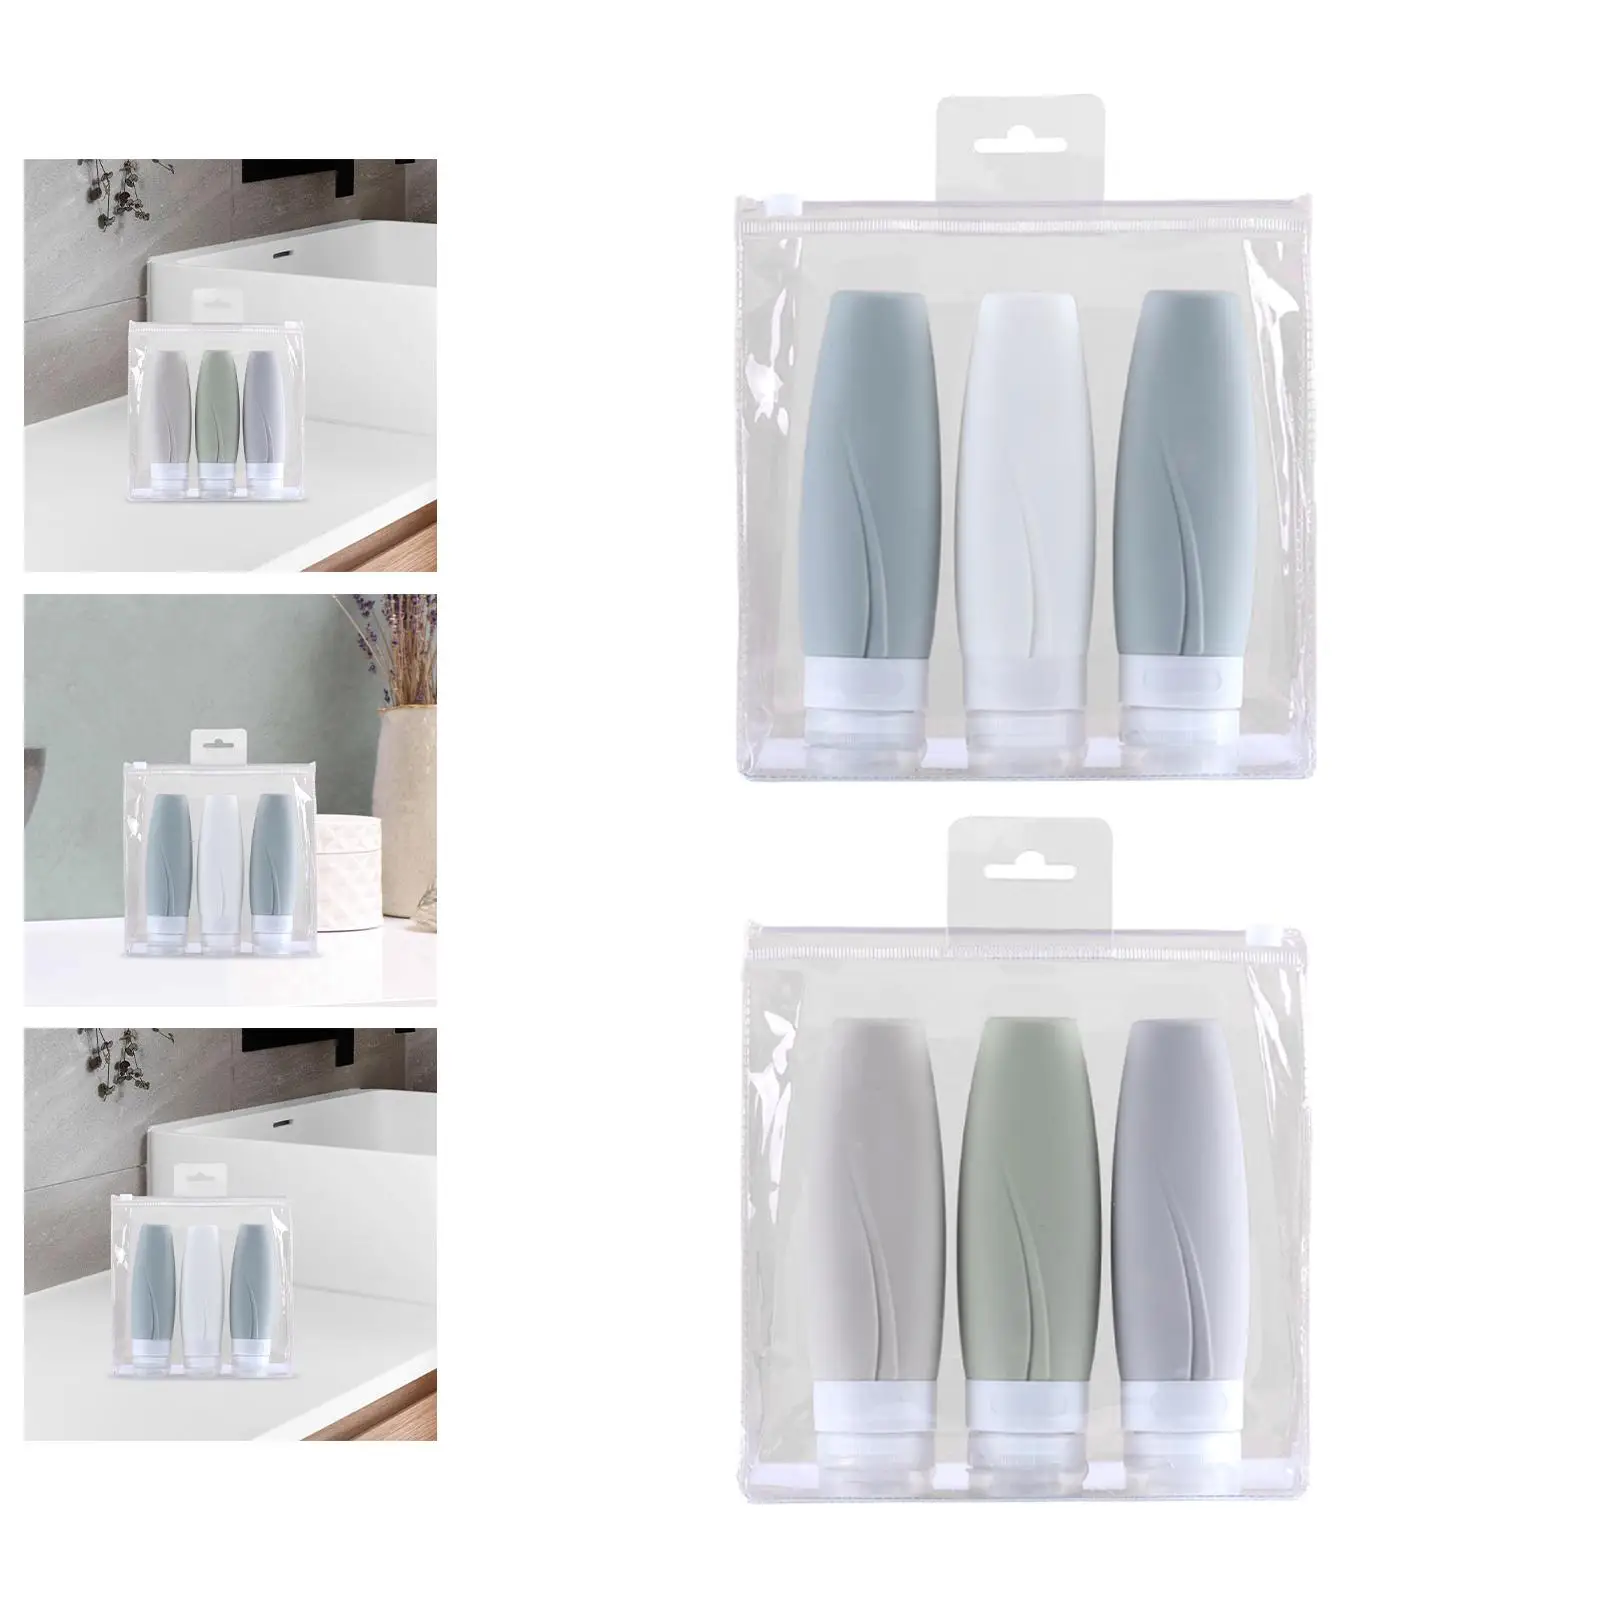 3x Travel Bottles Toiletry Container for Cosmetic Lotion Soap Conditioner